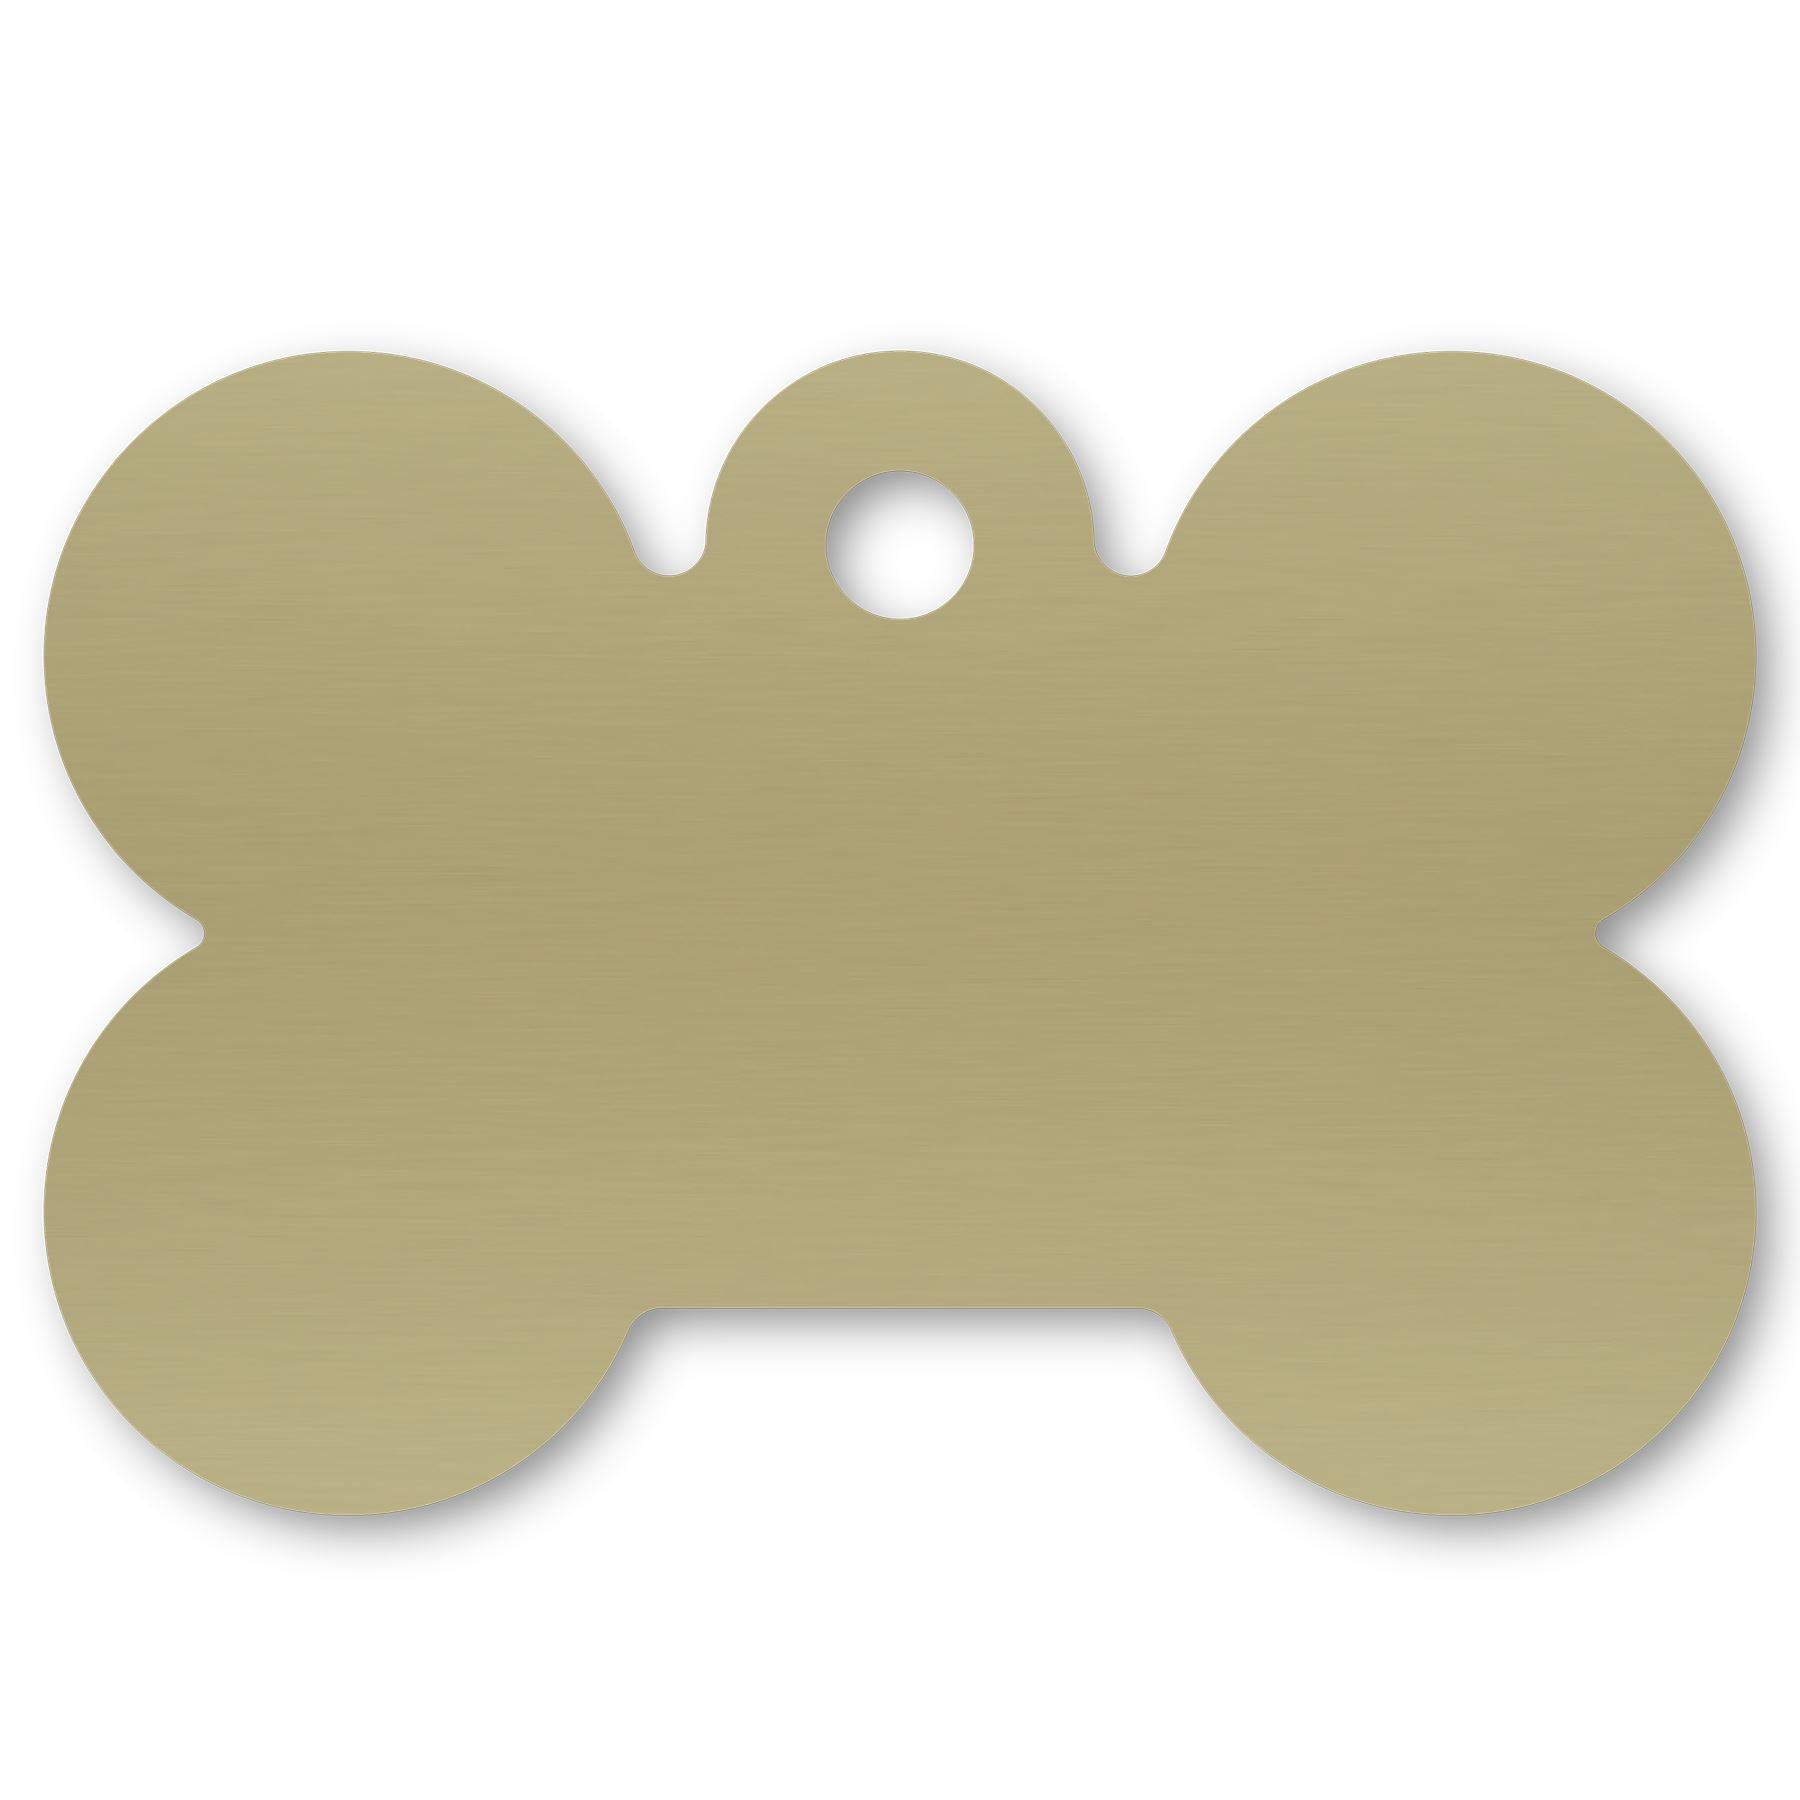 Anodized Aluminum Dog Bone Shaped Tags, 1-1/16" x 1-9/16" with 1/8" Hole, Laser Engraved Metal Tags Craftworks NW Gold 